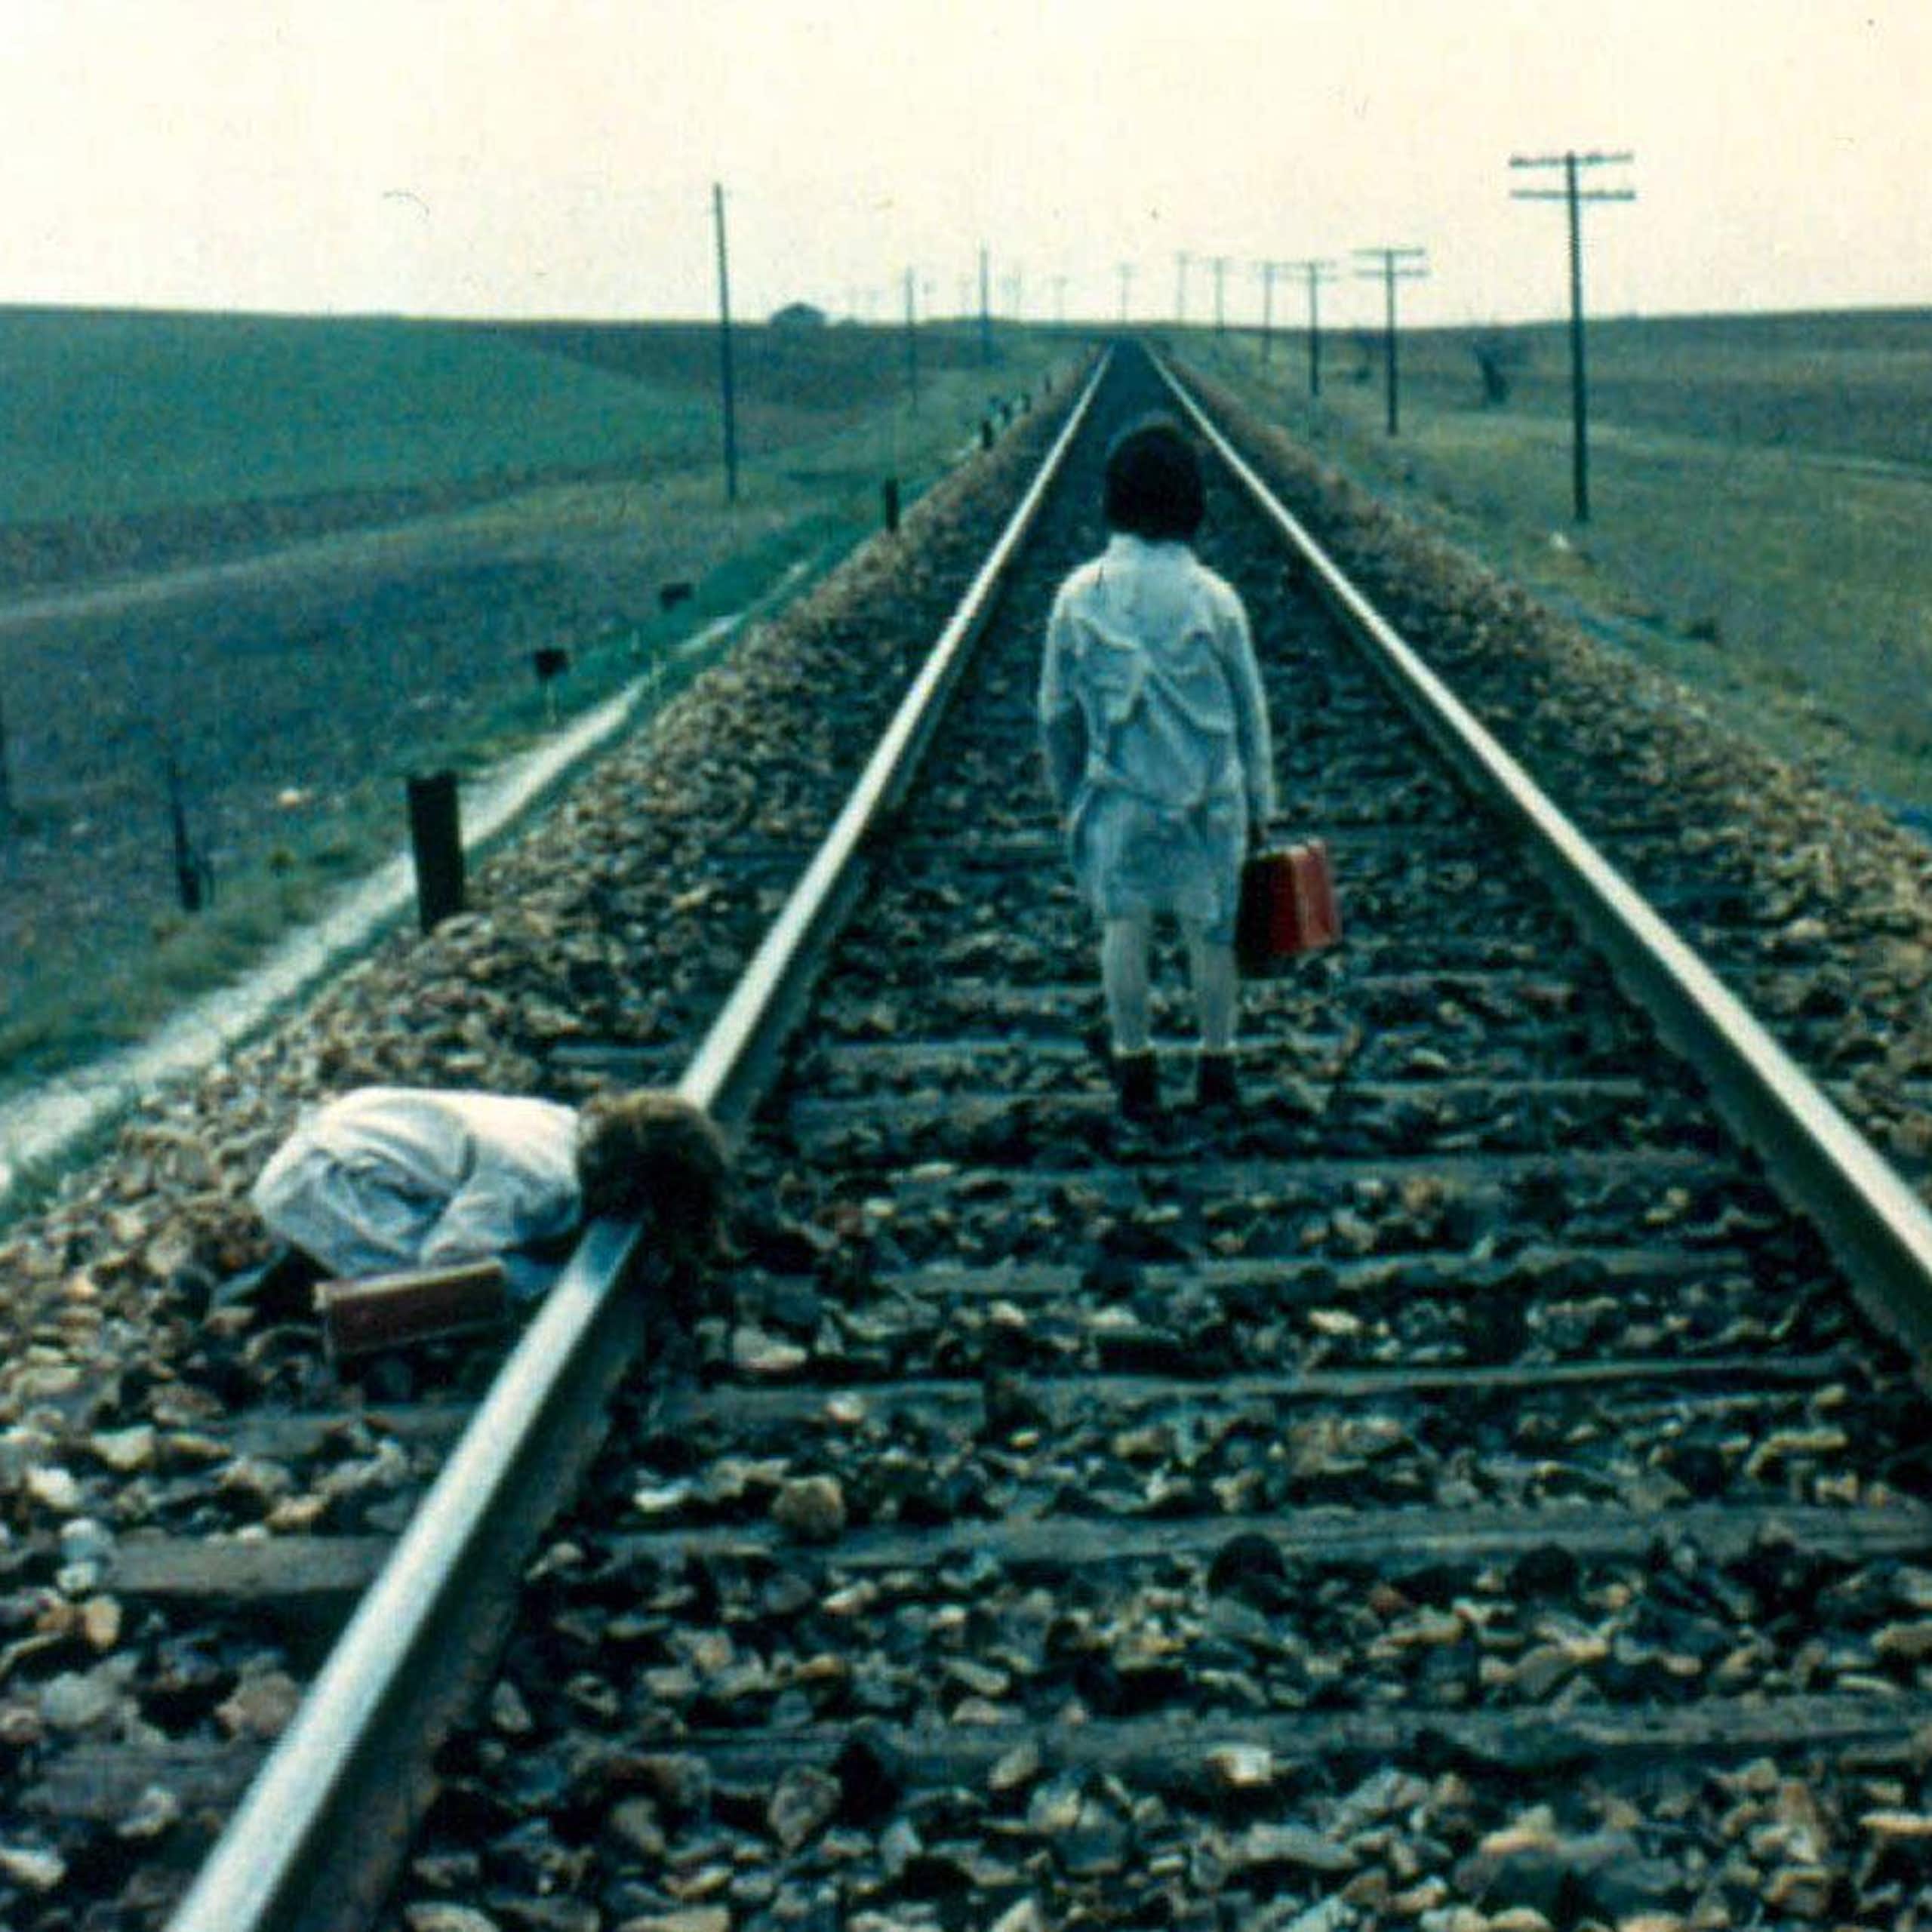 Two girls walk by a train track.